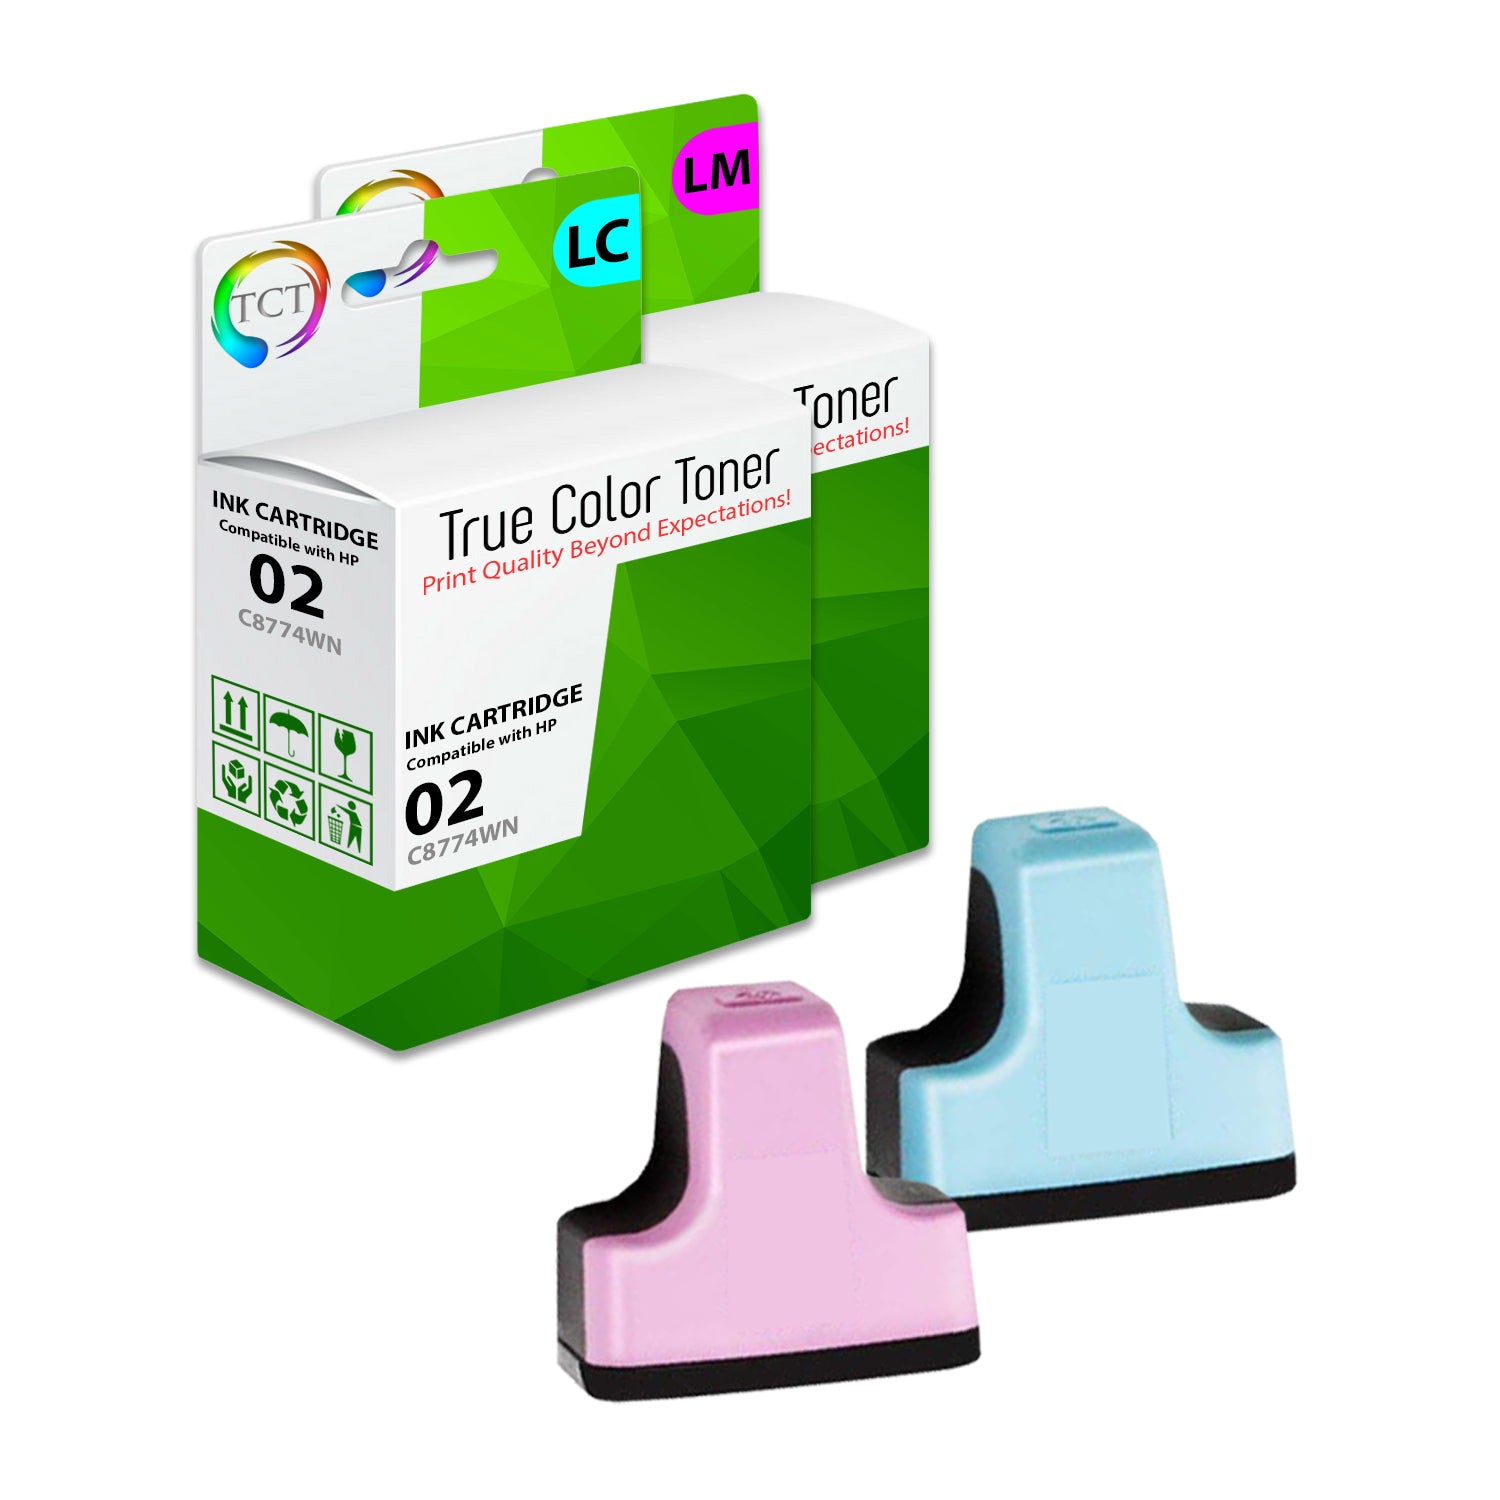 TCT Compatible Ink Cartridge Replacement for the HP 02 Series - 2 Pack (LC, LM)